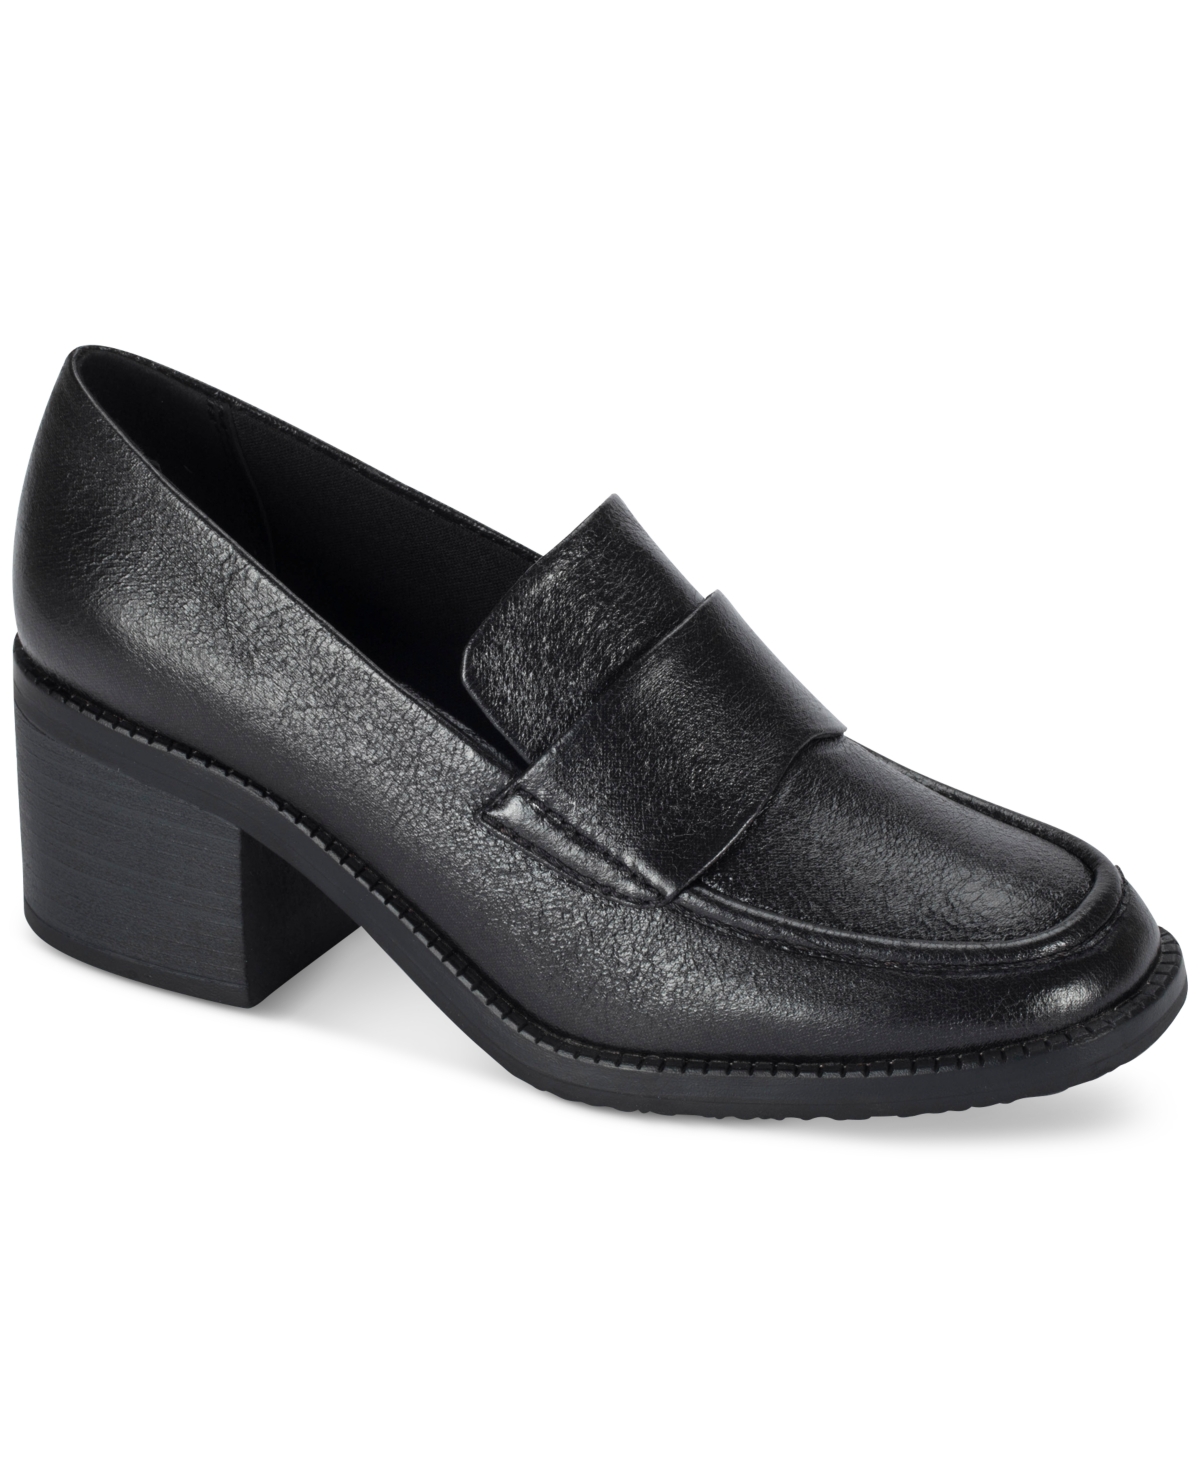 Women's Accord Penny Loafers - Black